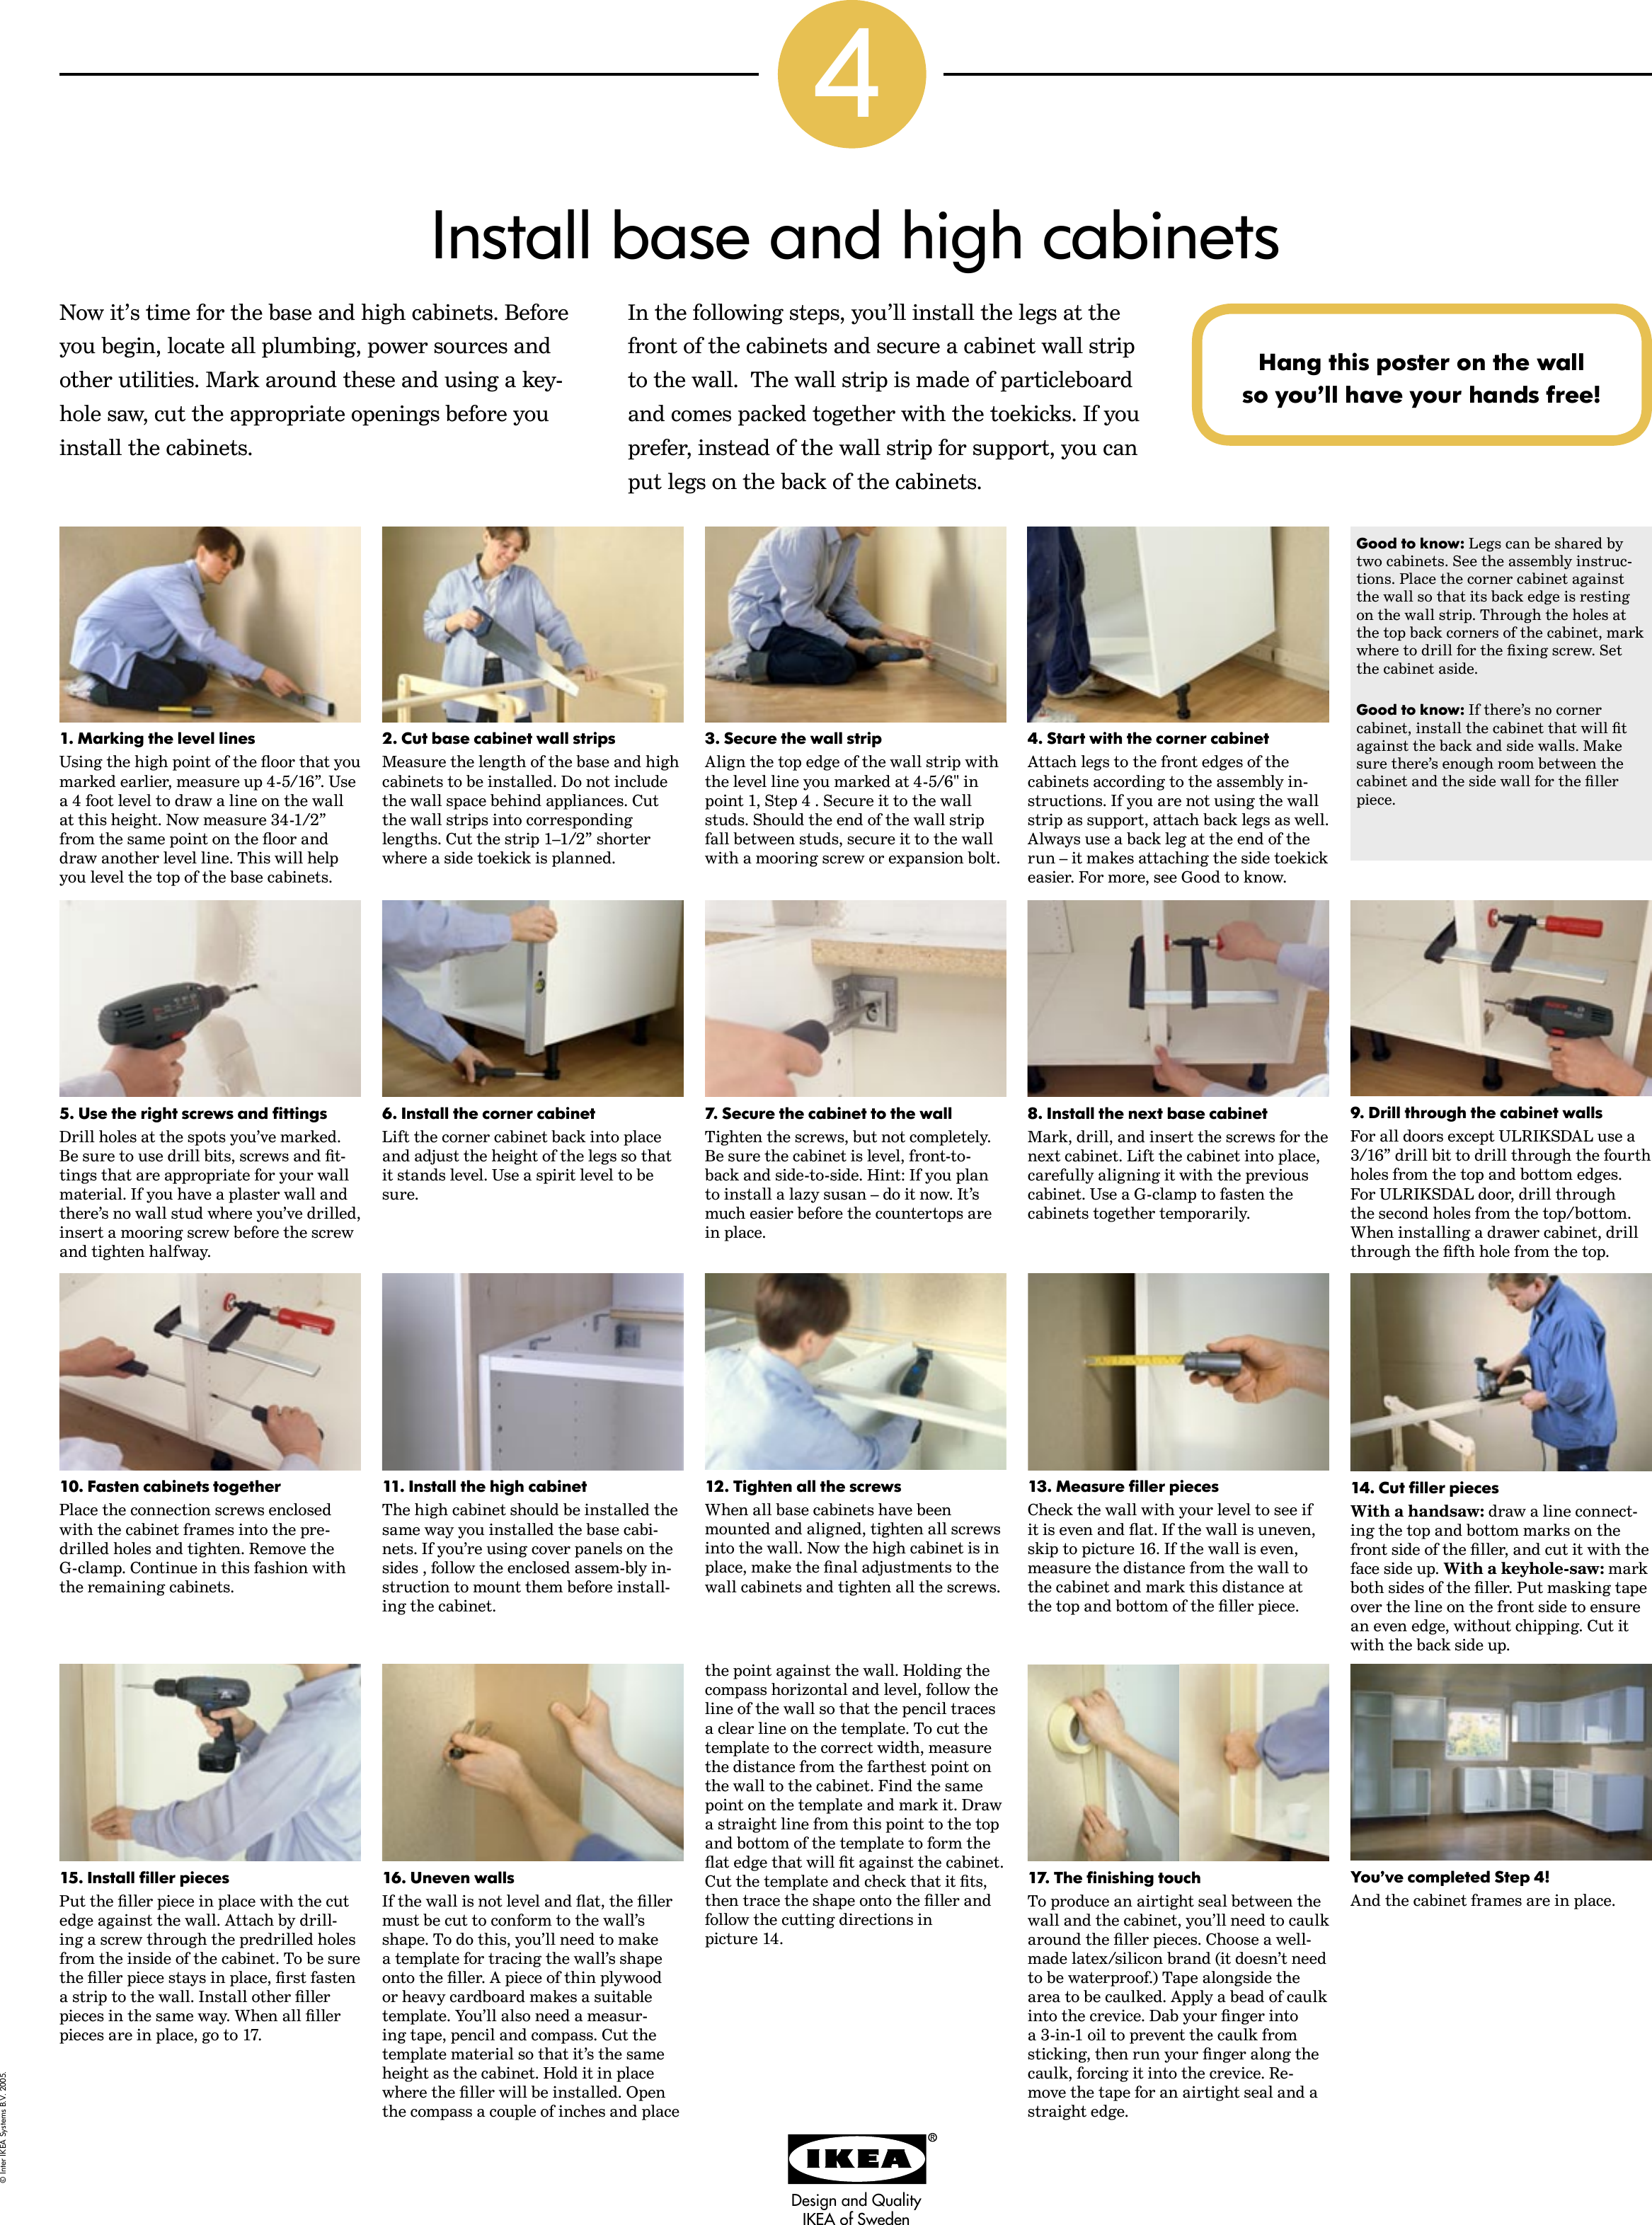 Page 2 of 4 - Ikea Ikea-Kitchen-Installation-Step-By-Step-Poster-Assembly-Instruction Step3_NA